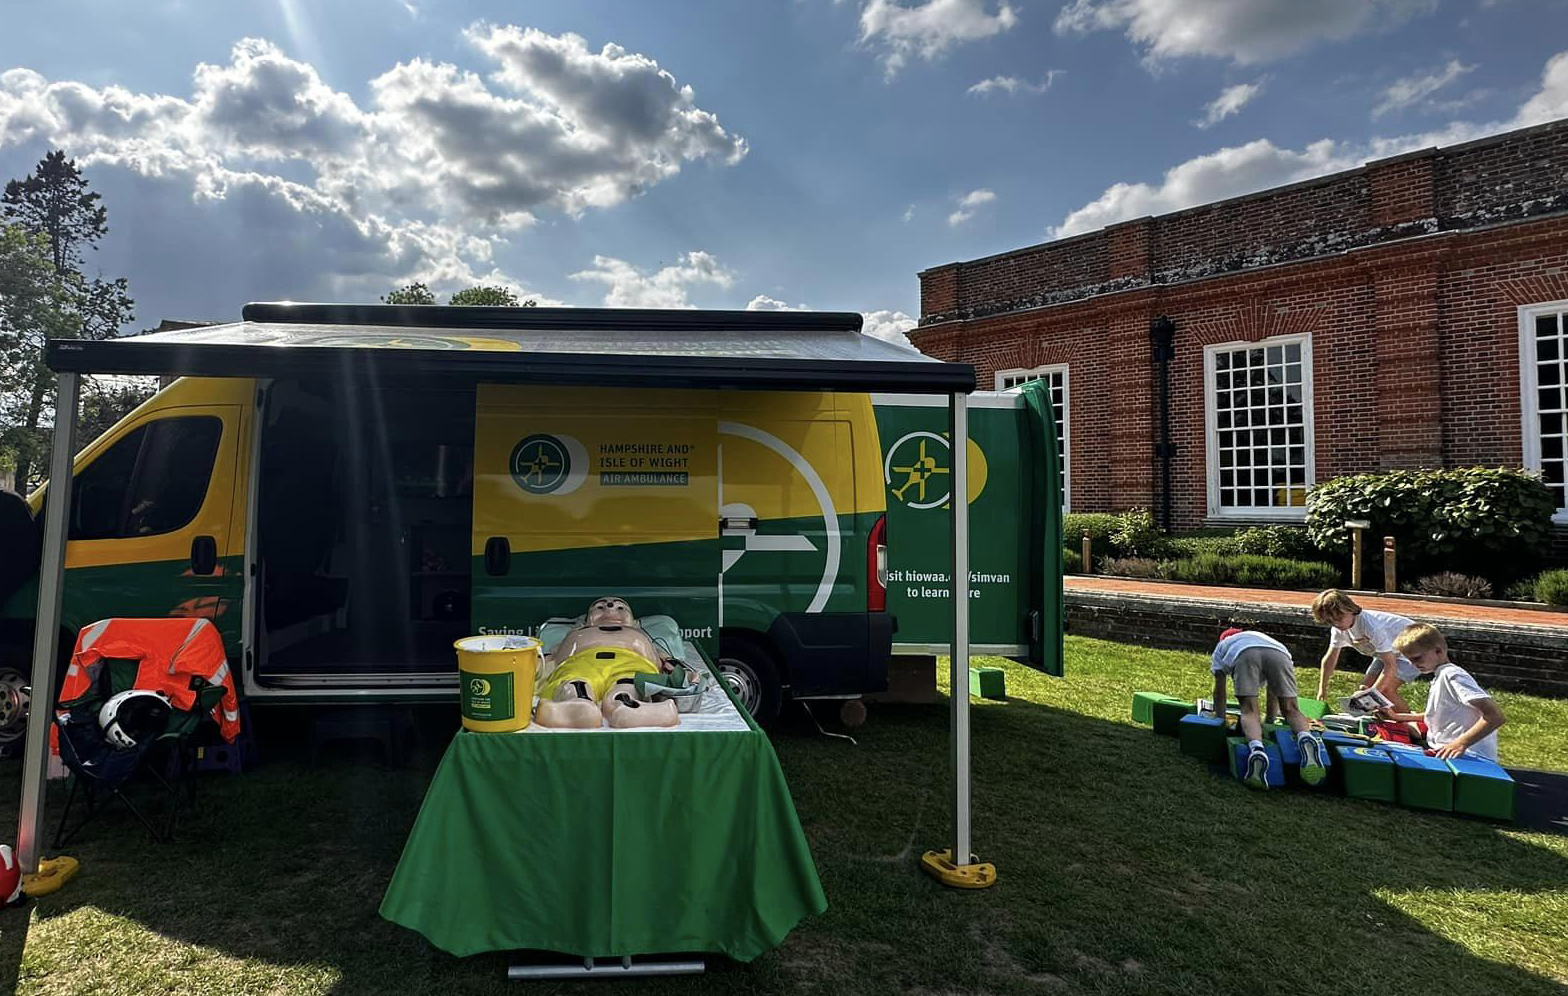 The Hampshire and Isle of Wight Simulation Van is set up at an event. The side door is open and a giant Operation game is on a table at the front, with a donation bucket on top. Three children are playing with the cube puzzle to the right hand side.